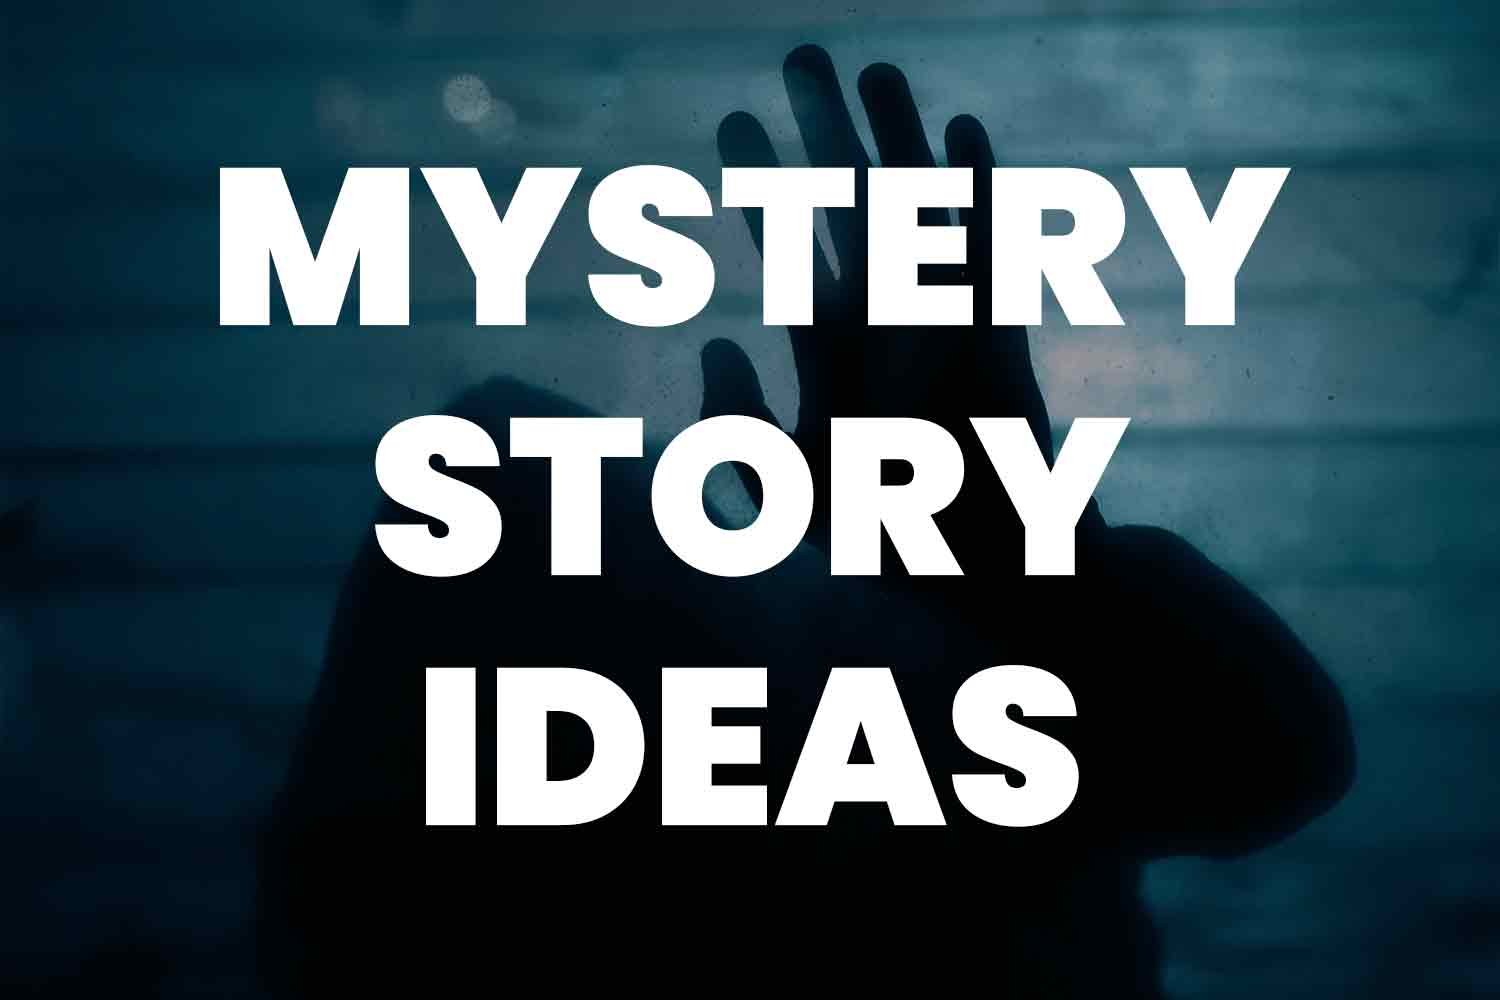 69+ Mystery Story Ideas To Keep Your Audience Guessing Until the End